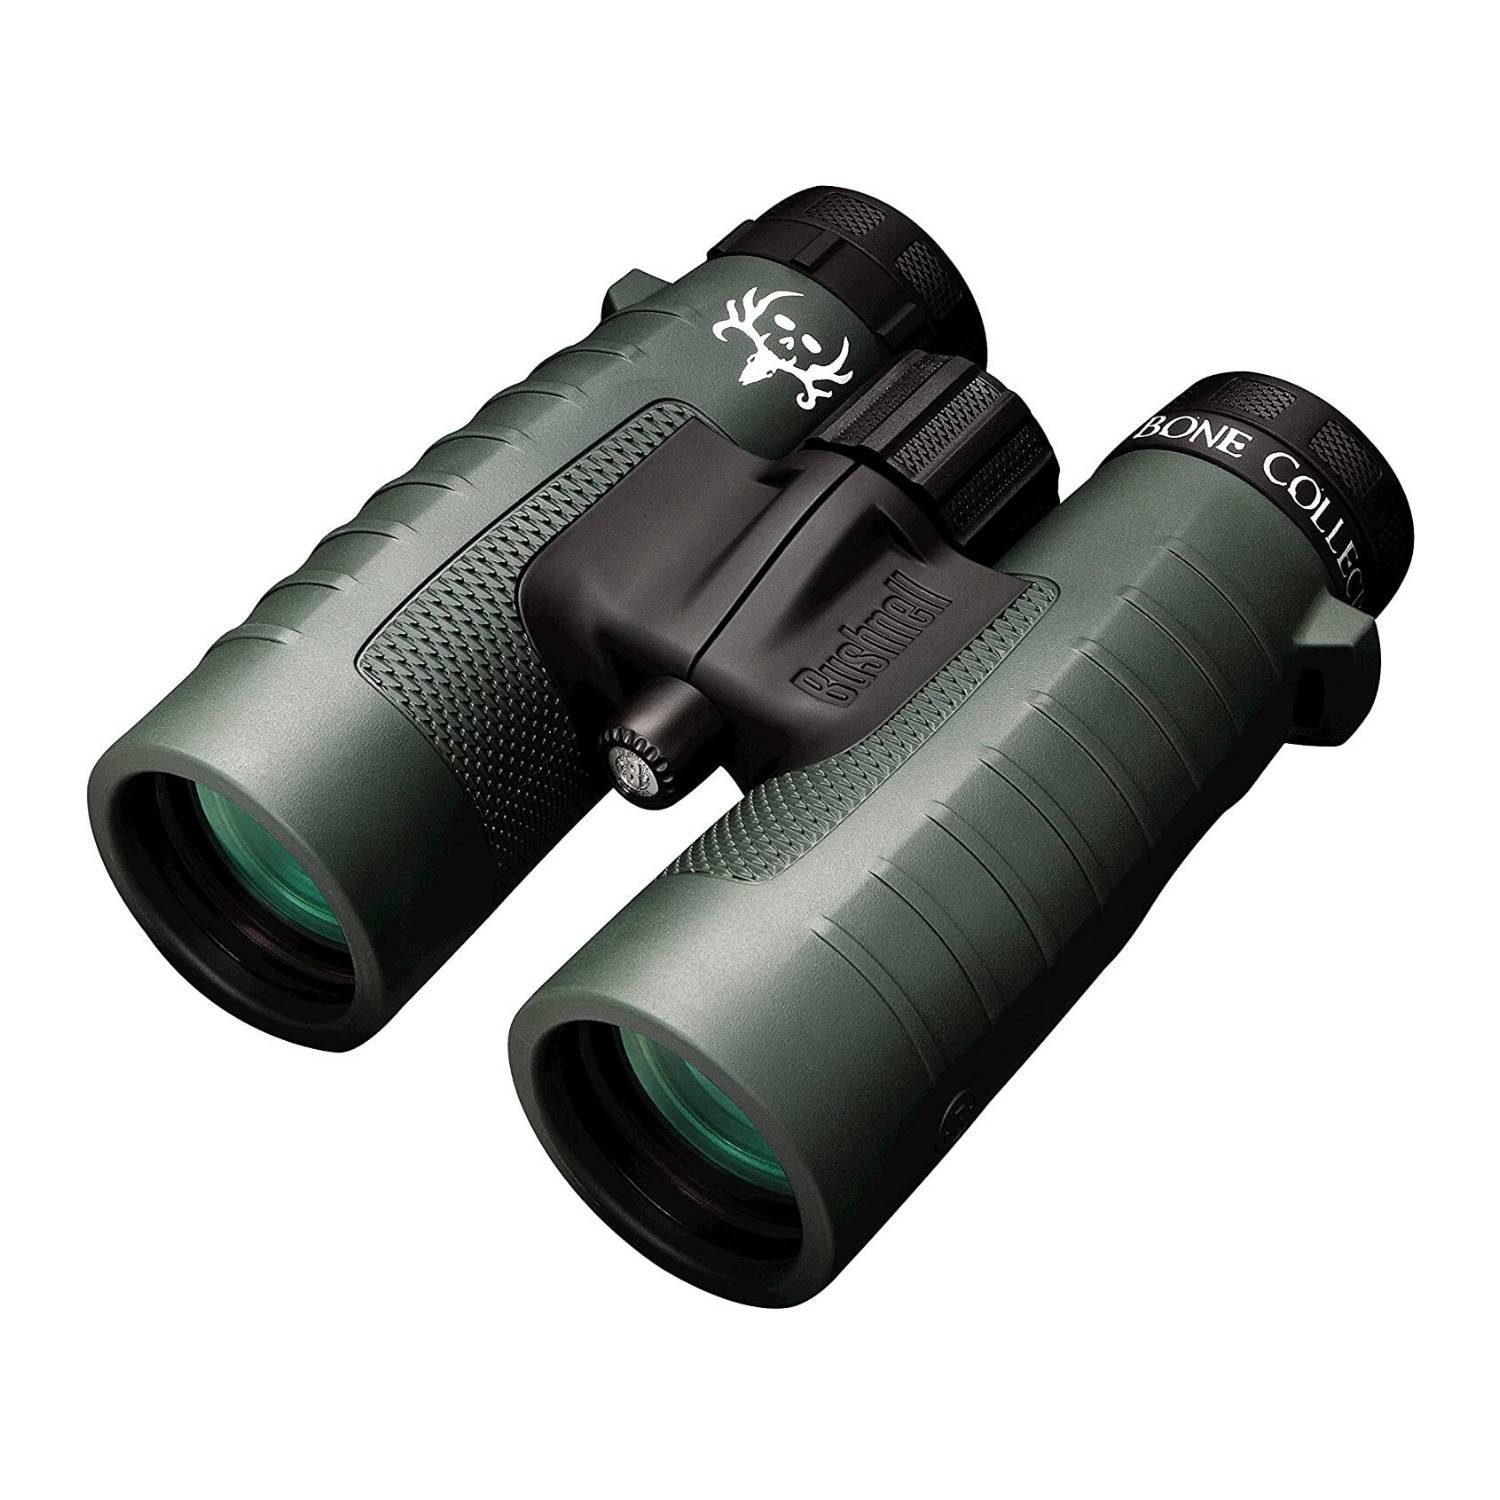 Bushnell 10 x 42 Trophy Roof Binoculars with Deluxe Harness (Green, Bone Collector Edition)